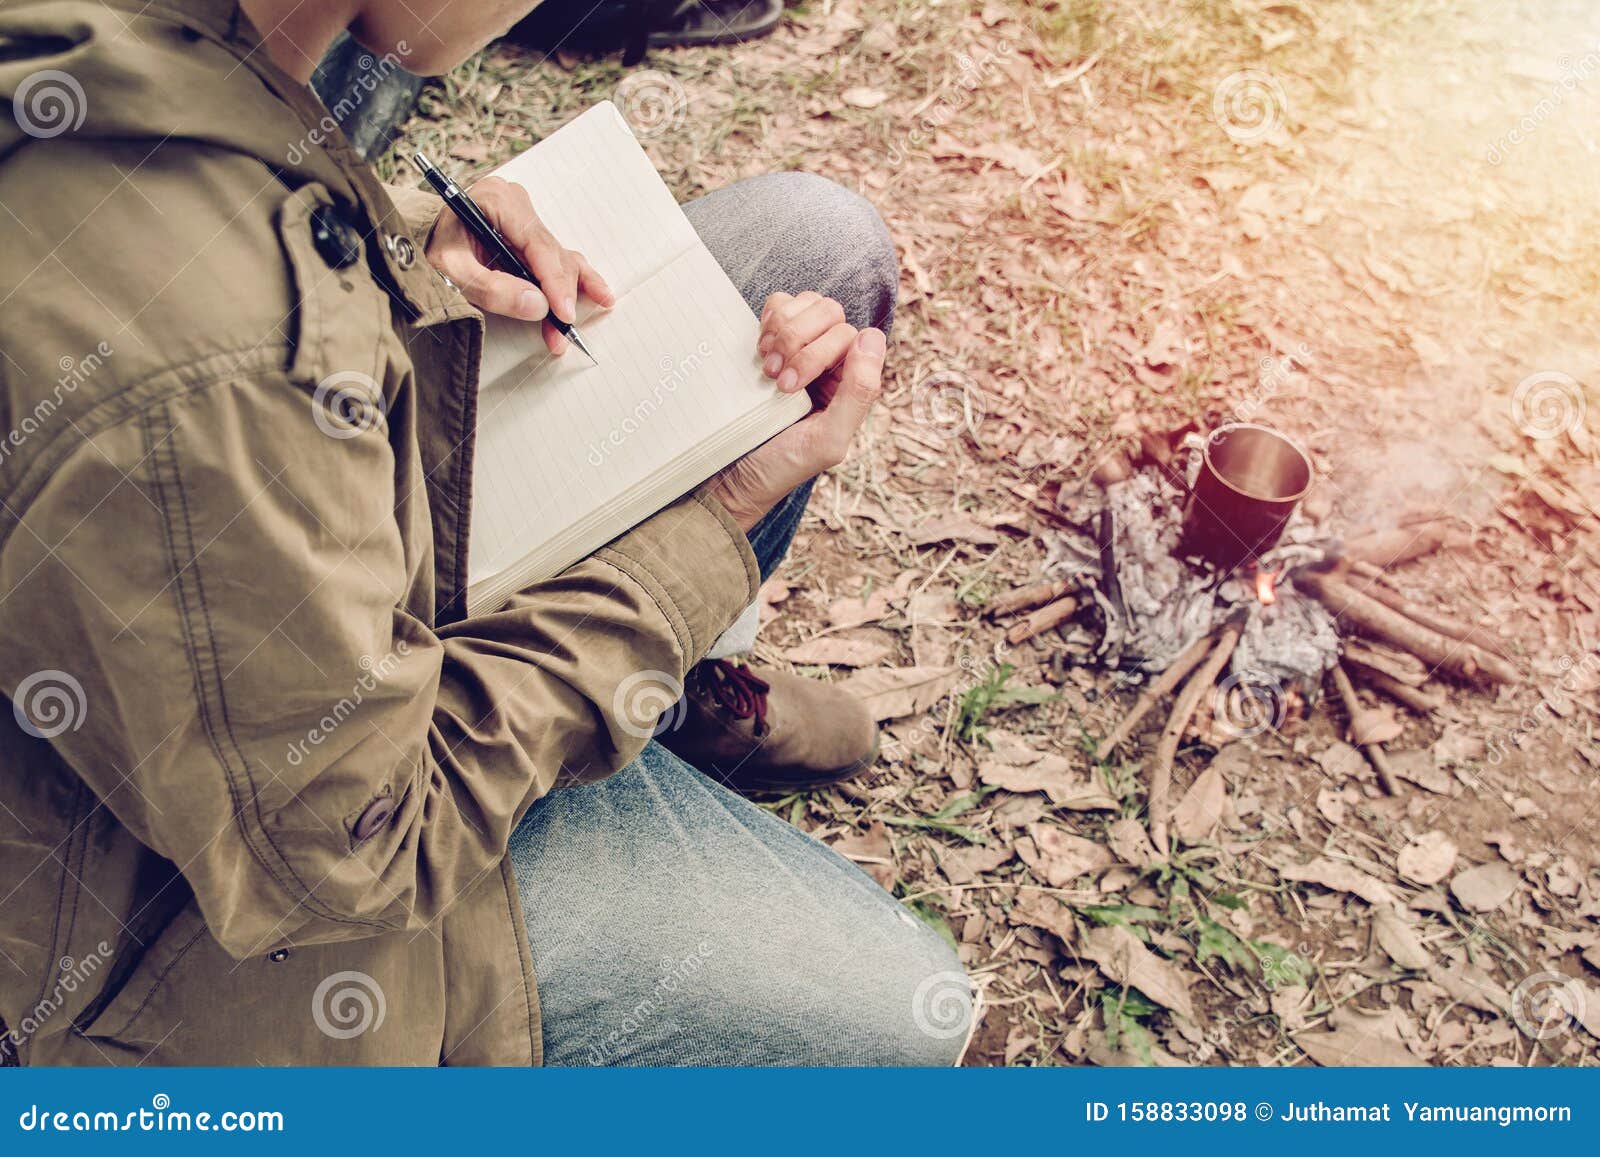 asian young man sitting is holding a pen writing note of letter memorize memories on book in outside the tent. loneliness camping